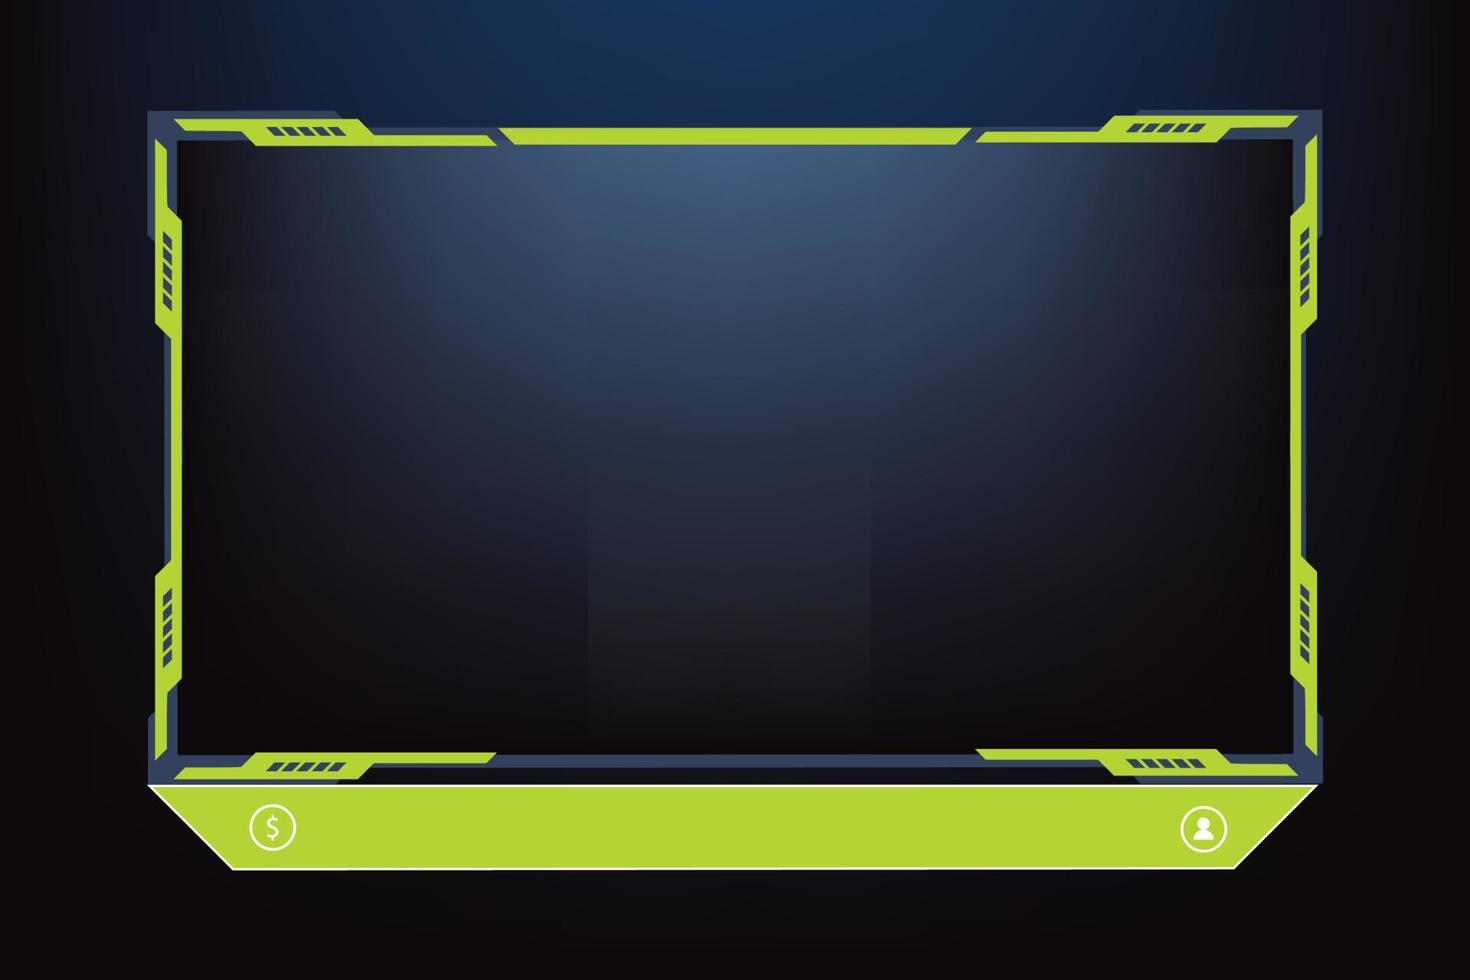 Live streaming overlay vector for online gamers. Online gaming frame vector with green color. Futuristic screen border design with an offline screen. Live broadcast screen decoration with buttons.